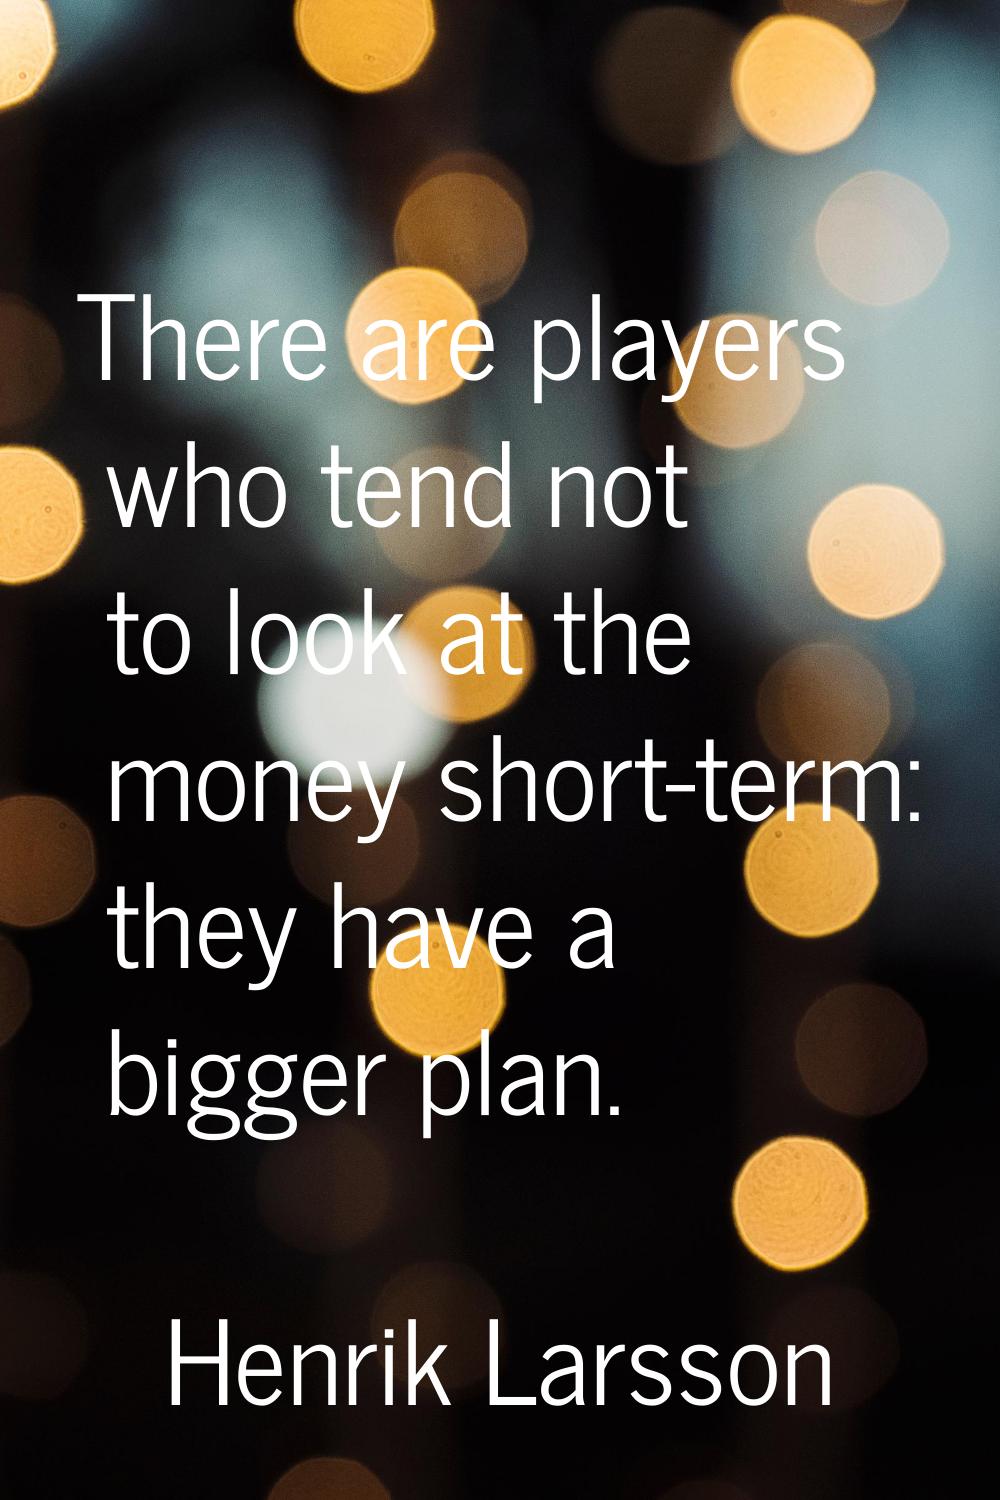 There are players who tend not to look at the money short-term: they have a bigger plan.